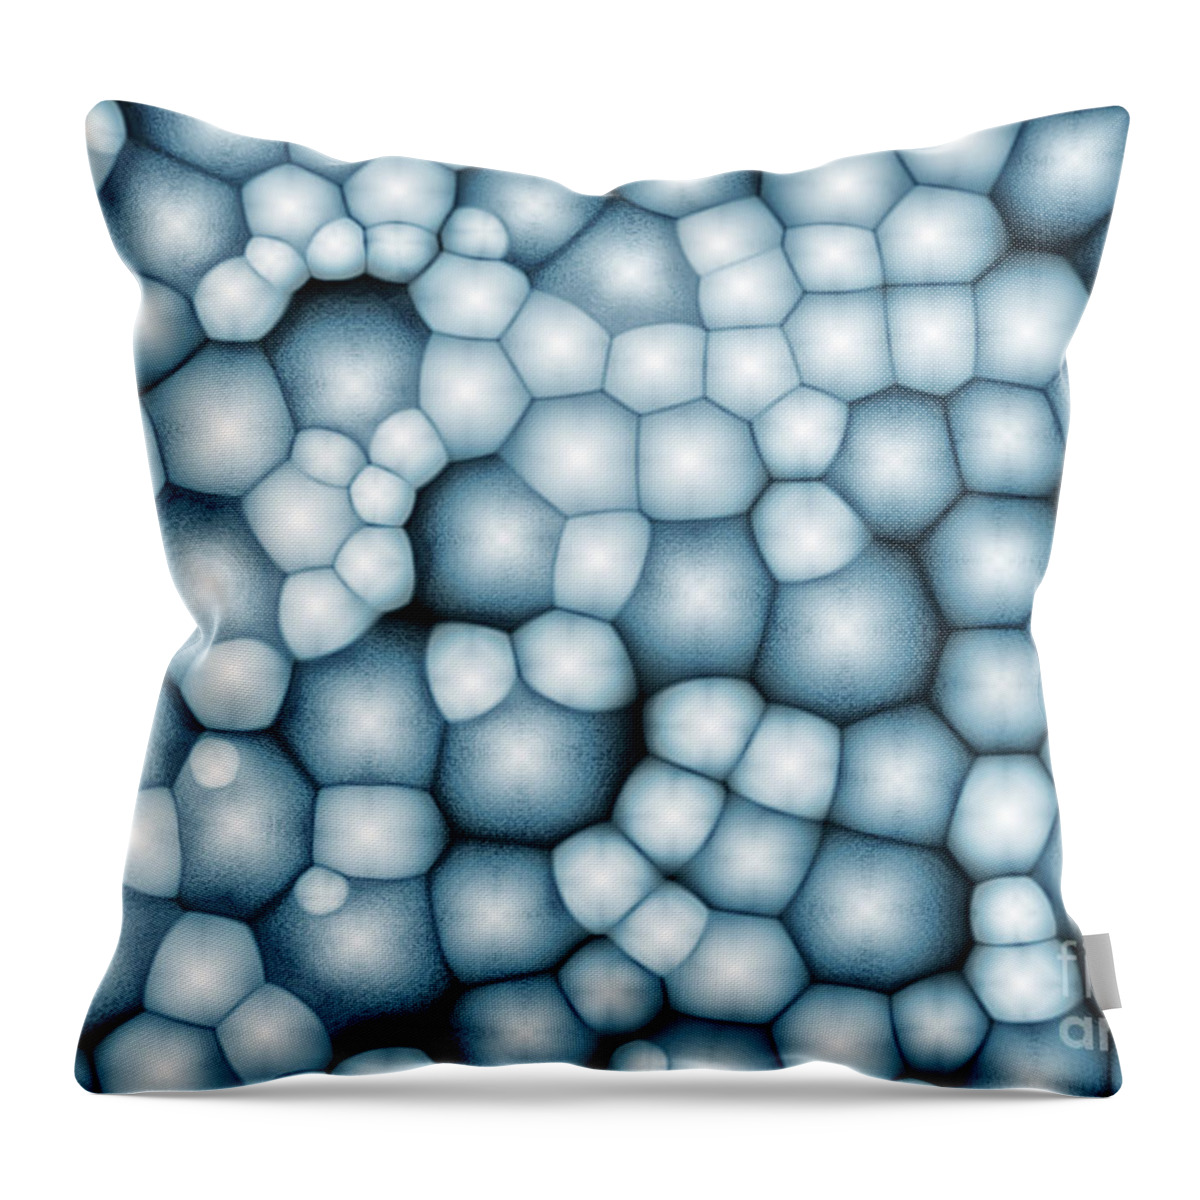 Blue Throw Pillow featuring the digital art Abstract Blue Bubbles by Phil Perkins